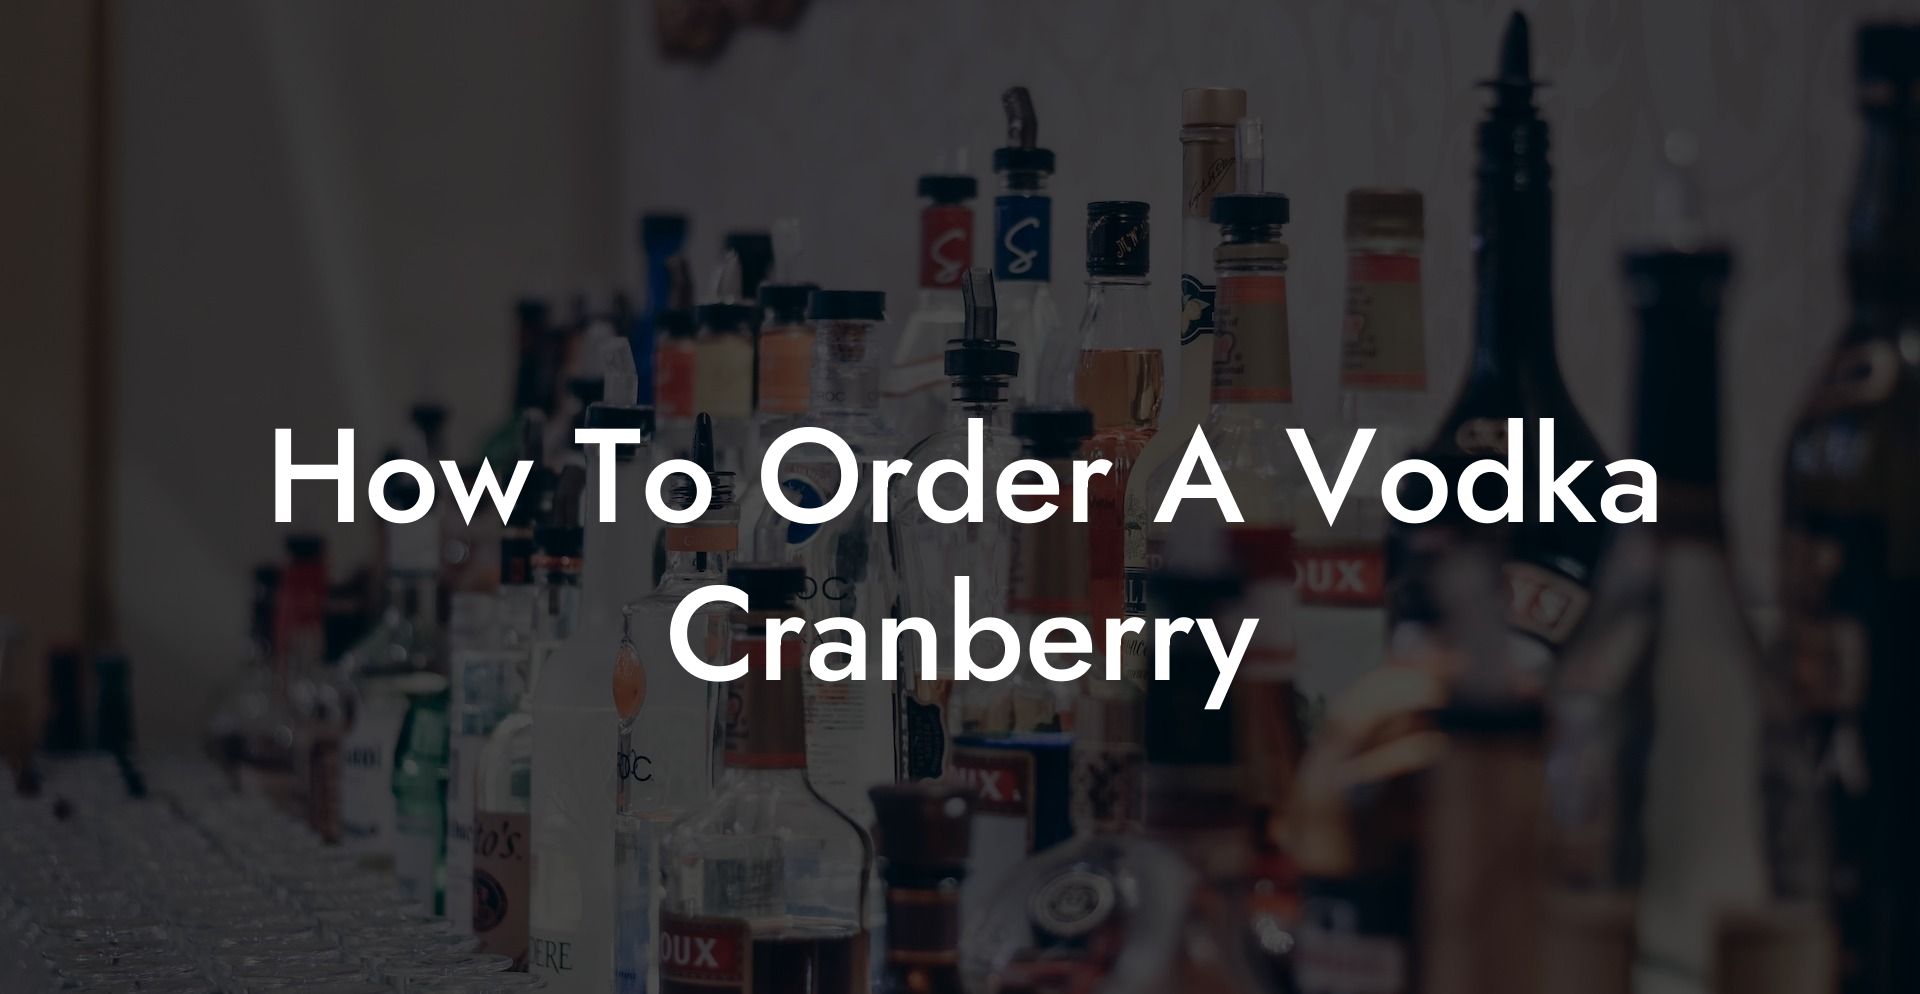 How To Order A Vodka Cranberry